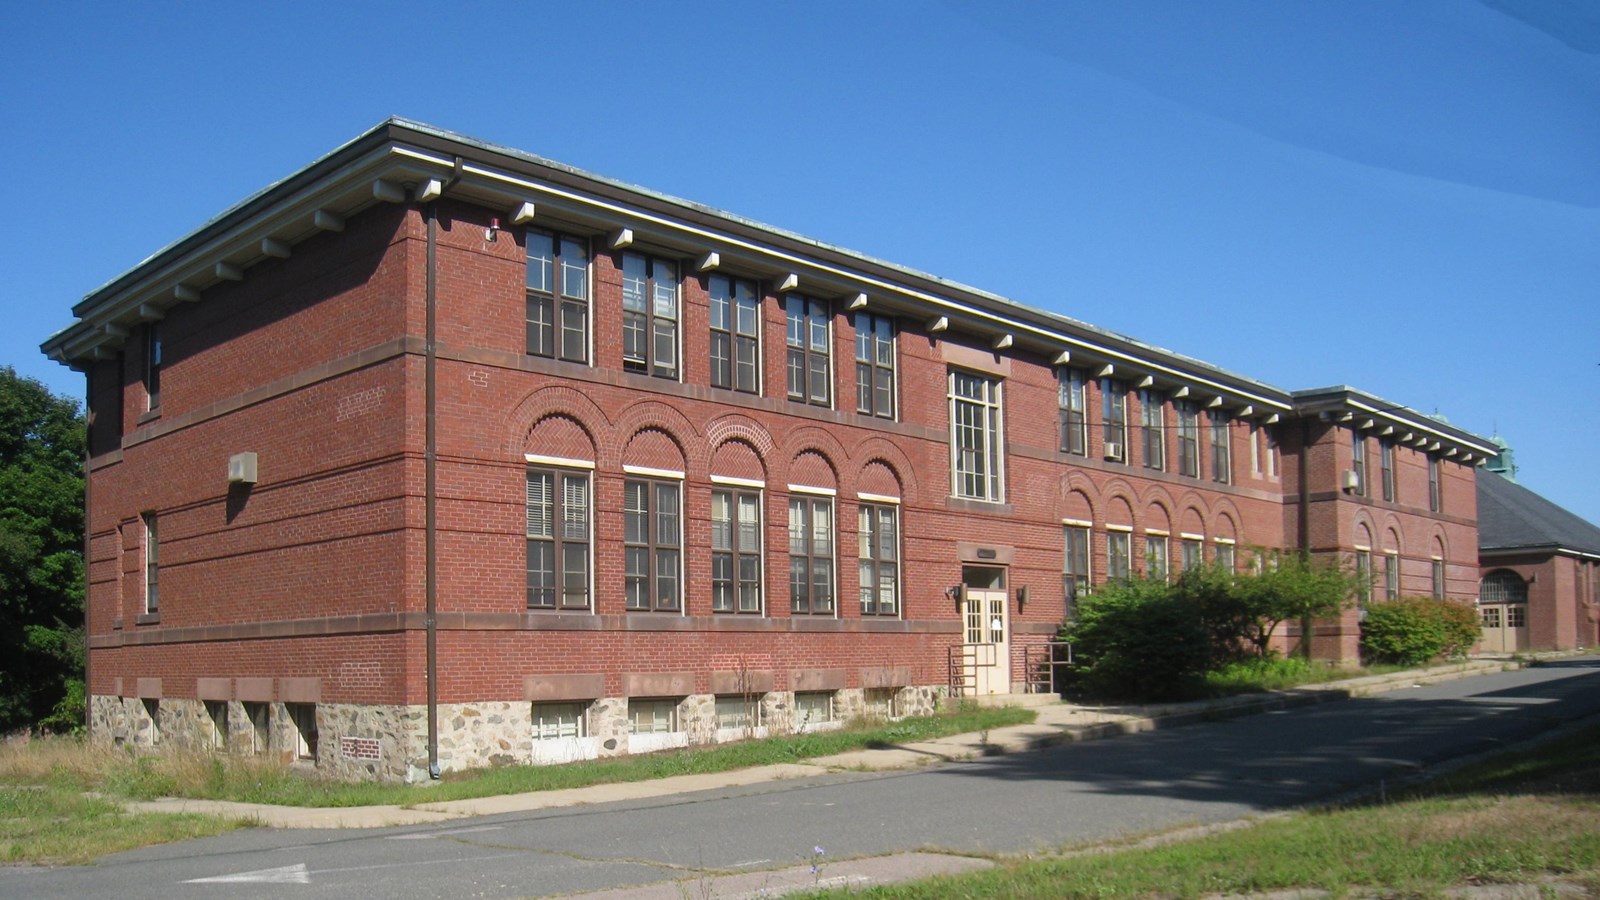 Large, two-story red brick building